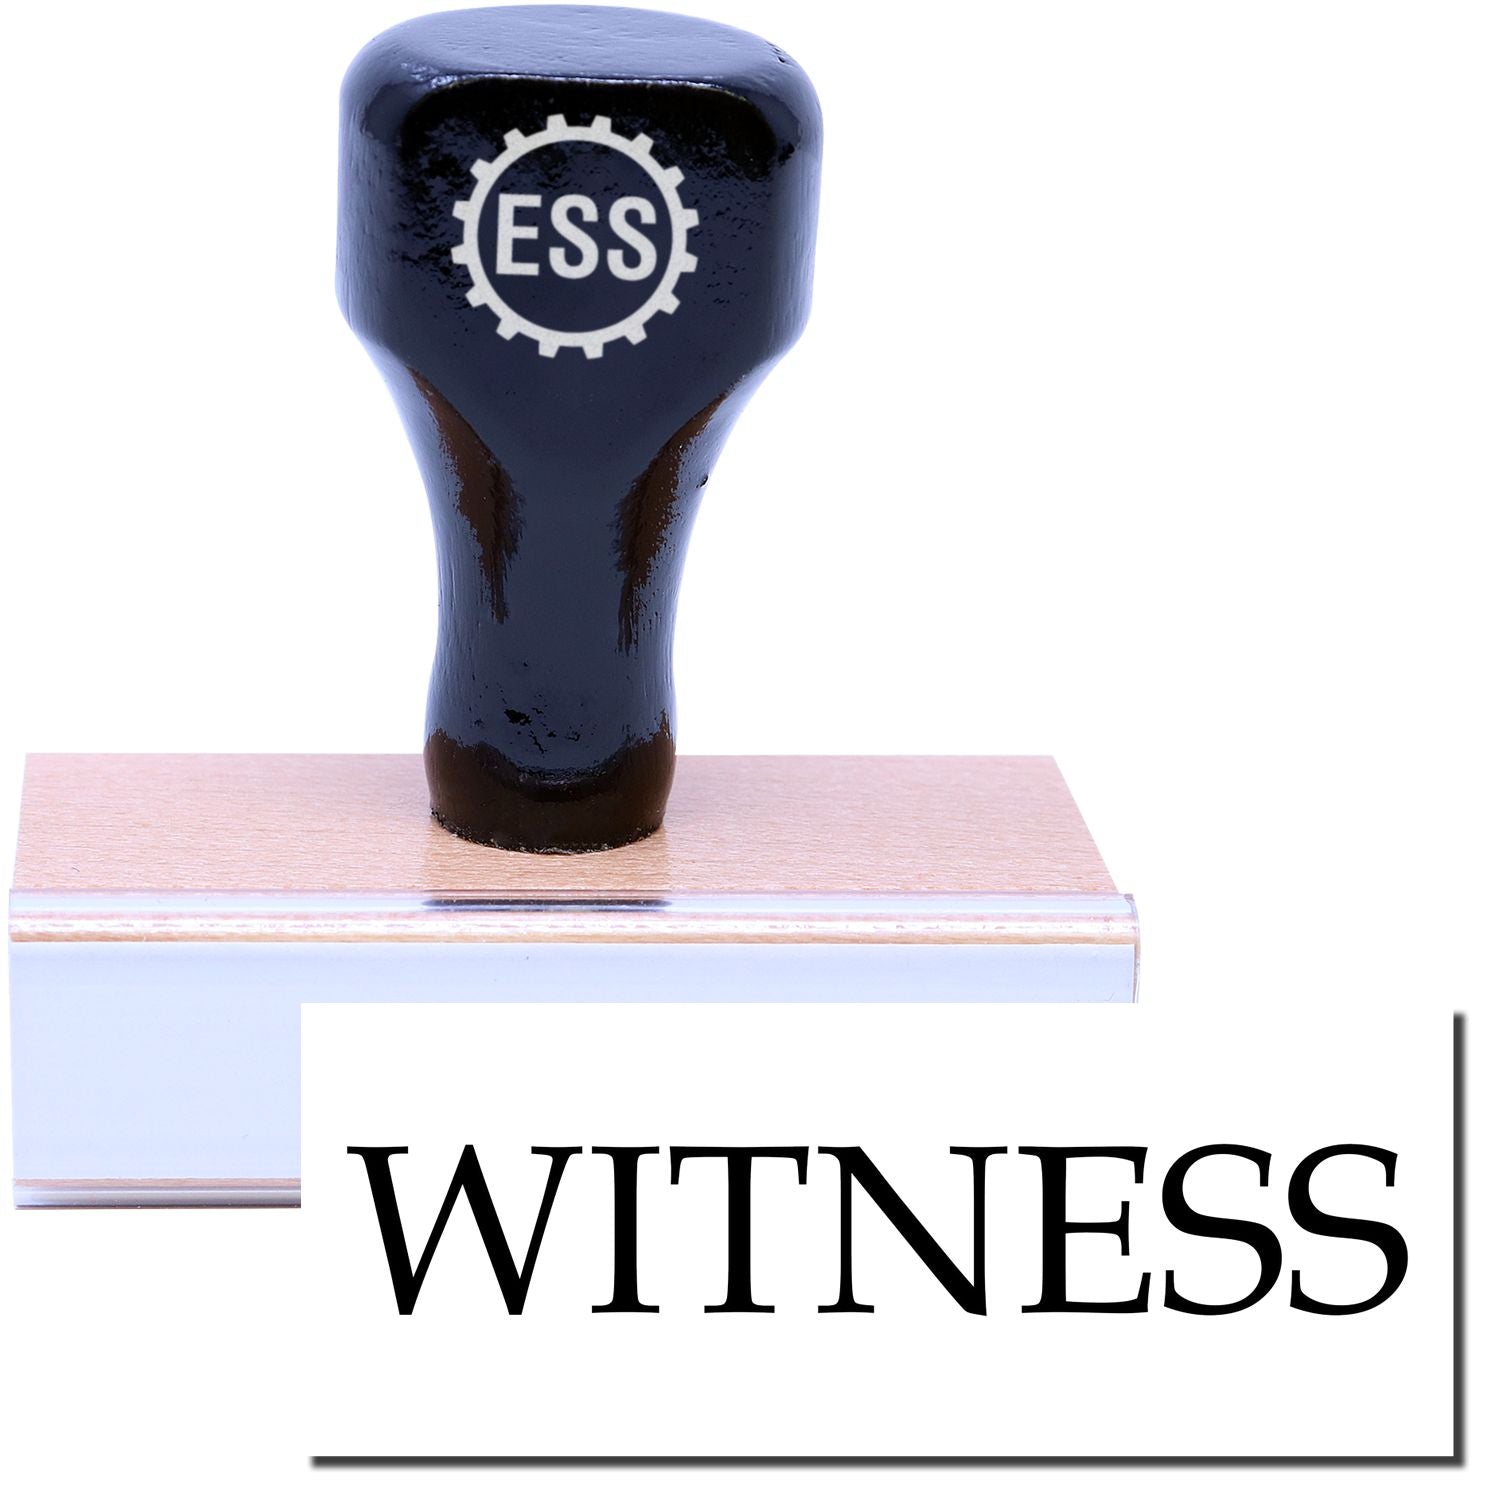 A stock office rubber stamp with a stamped image showing how the text "WITNESS" in a large font is displayed after stamping.